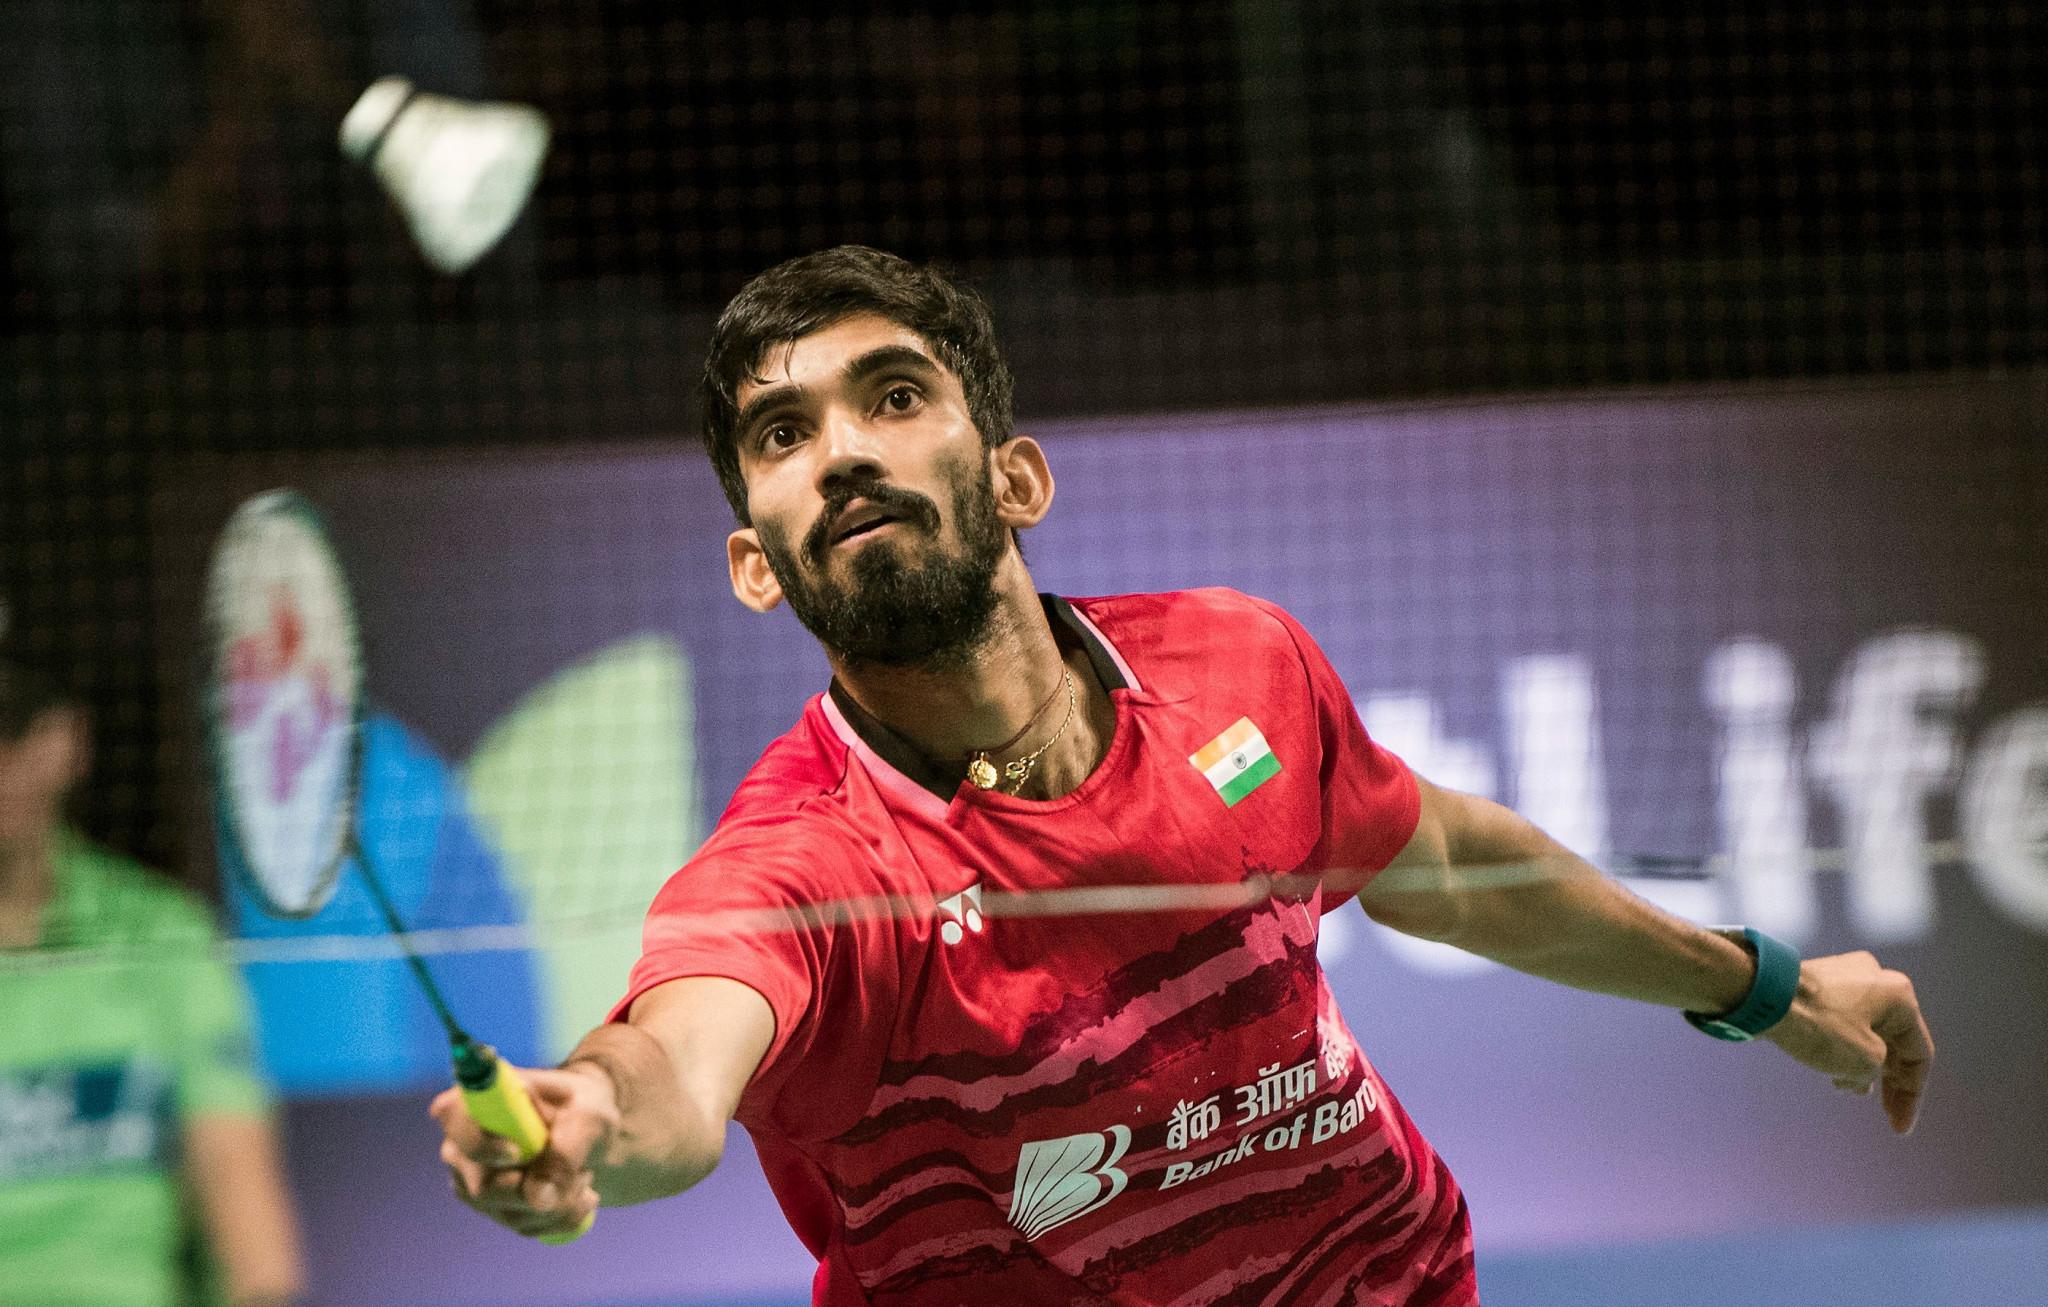 Srikanth Kidambi booked his place for Hangzhou 2022 after prevailing in the Hyderabad selection event ©Getty Images